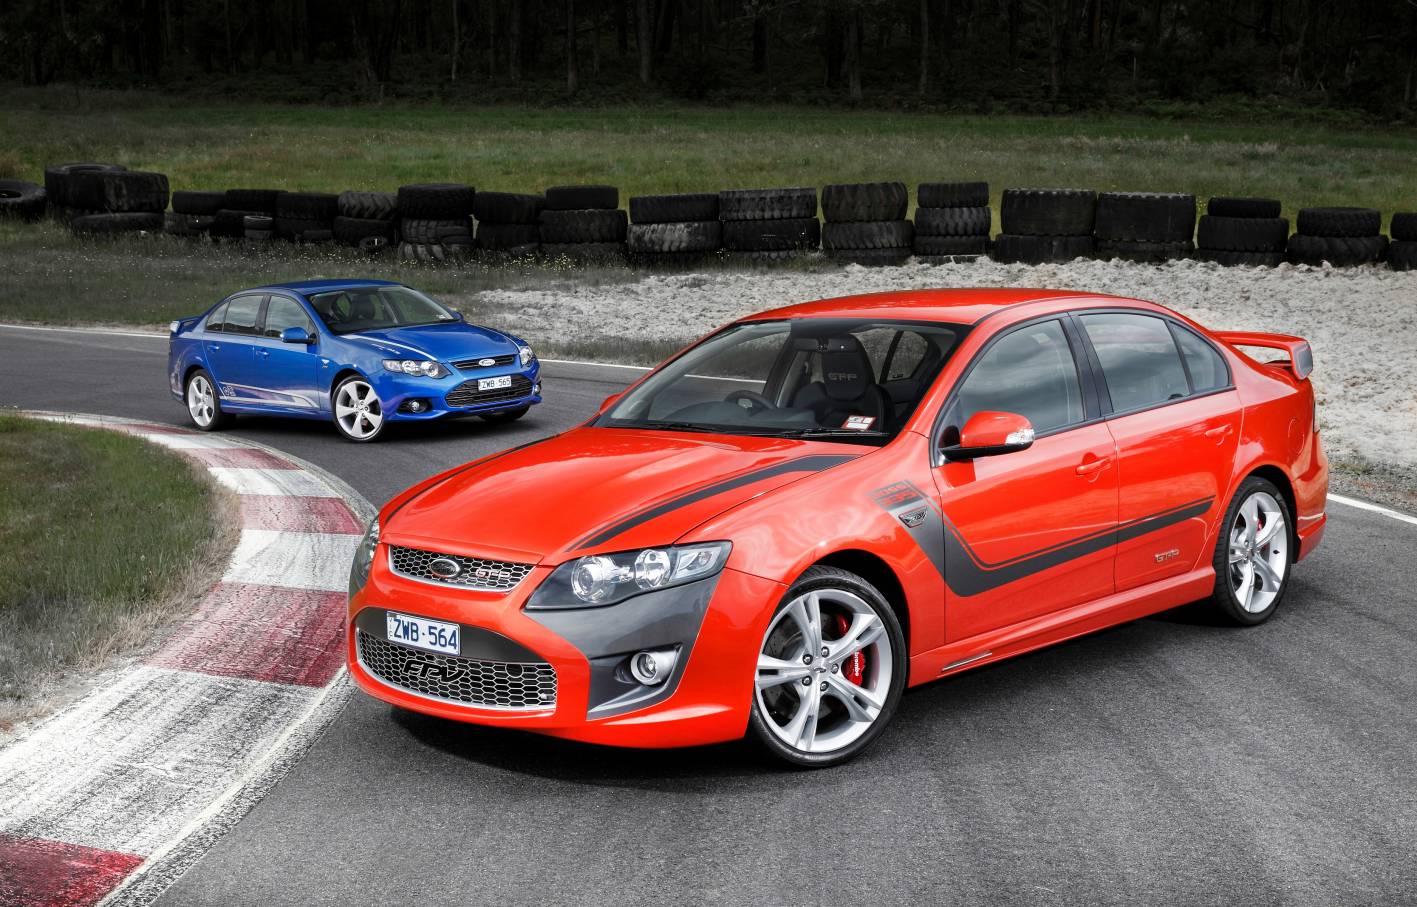 News - Ford Falcon XR8 To Return Next Year